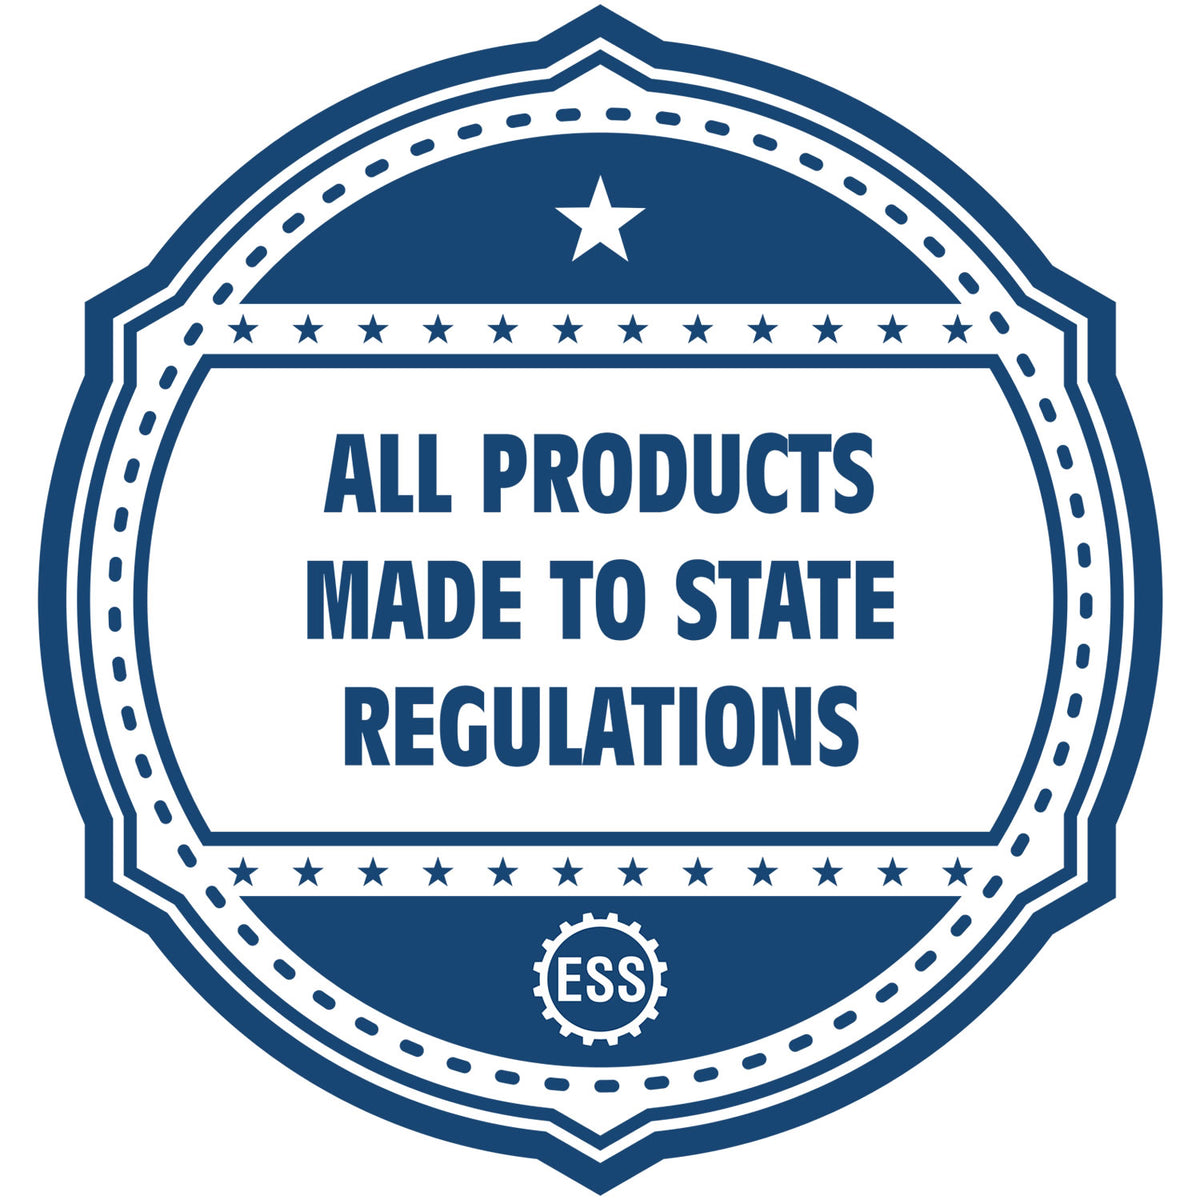 An icon or badge element for the Alaska Landscape Architectural Seal Stamp showing that this product is made in compliance with state regulations.